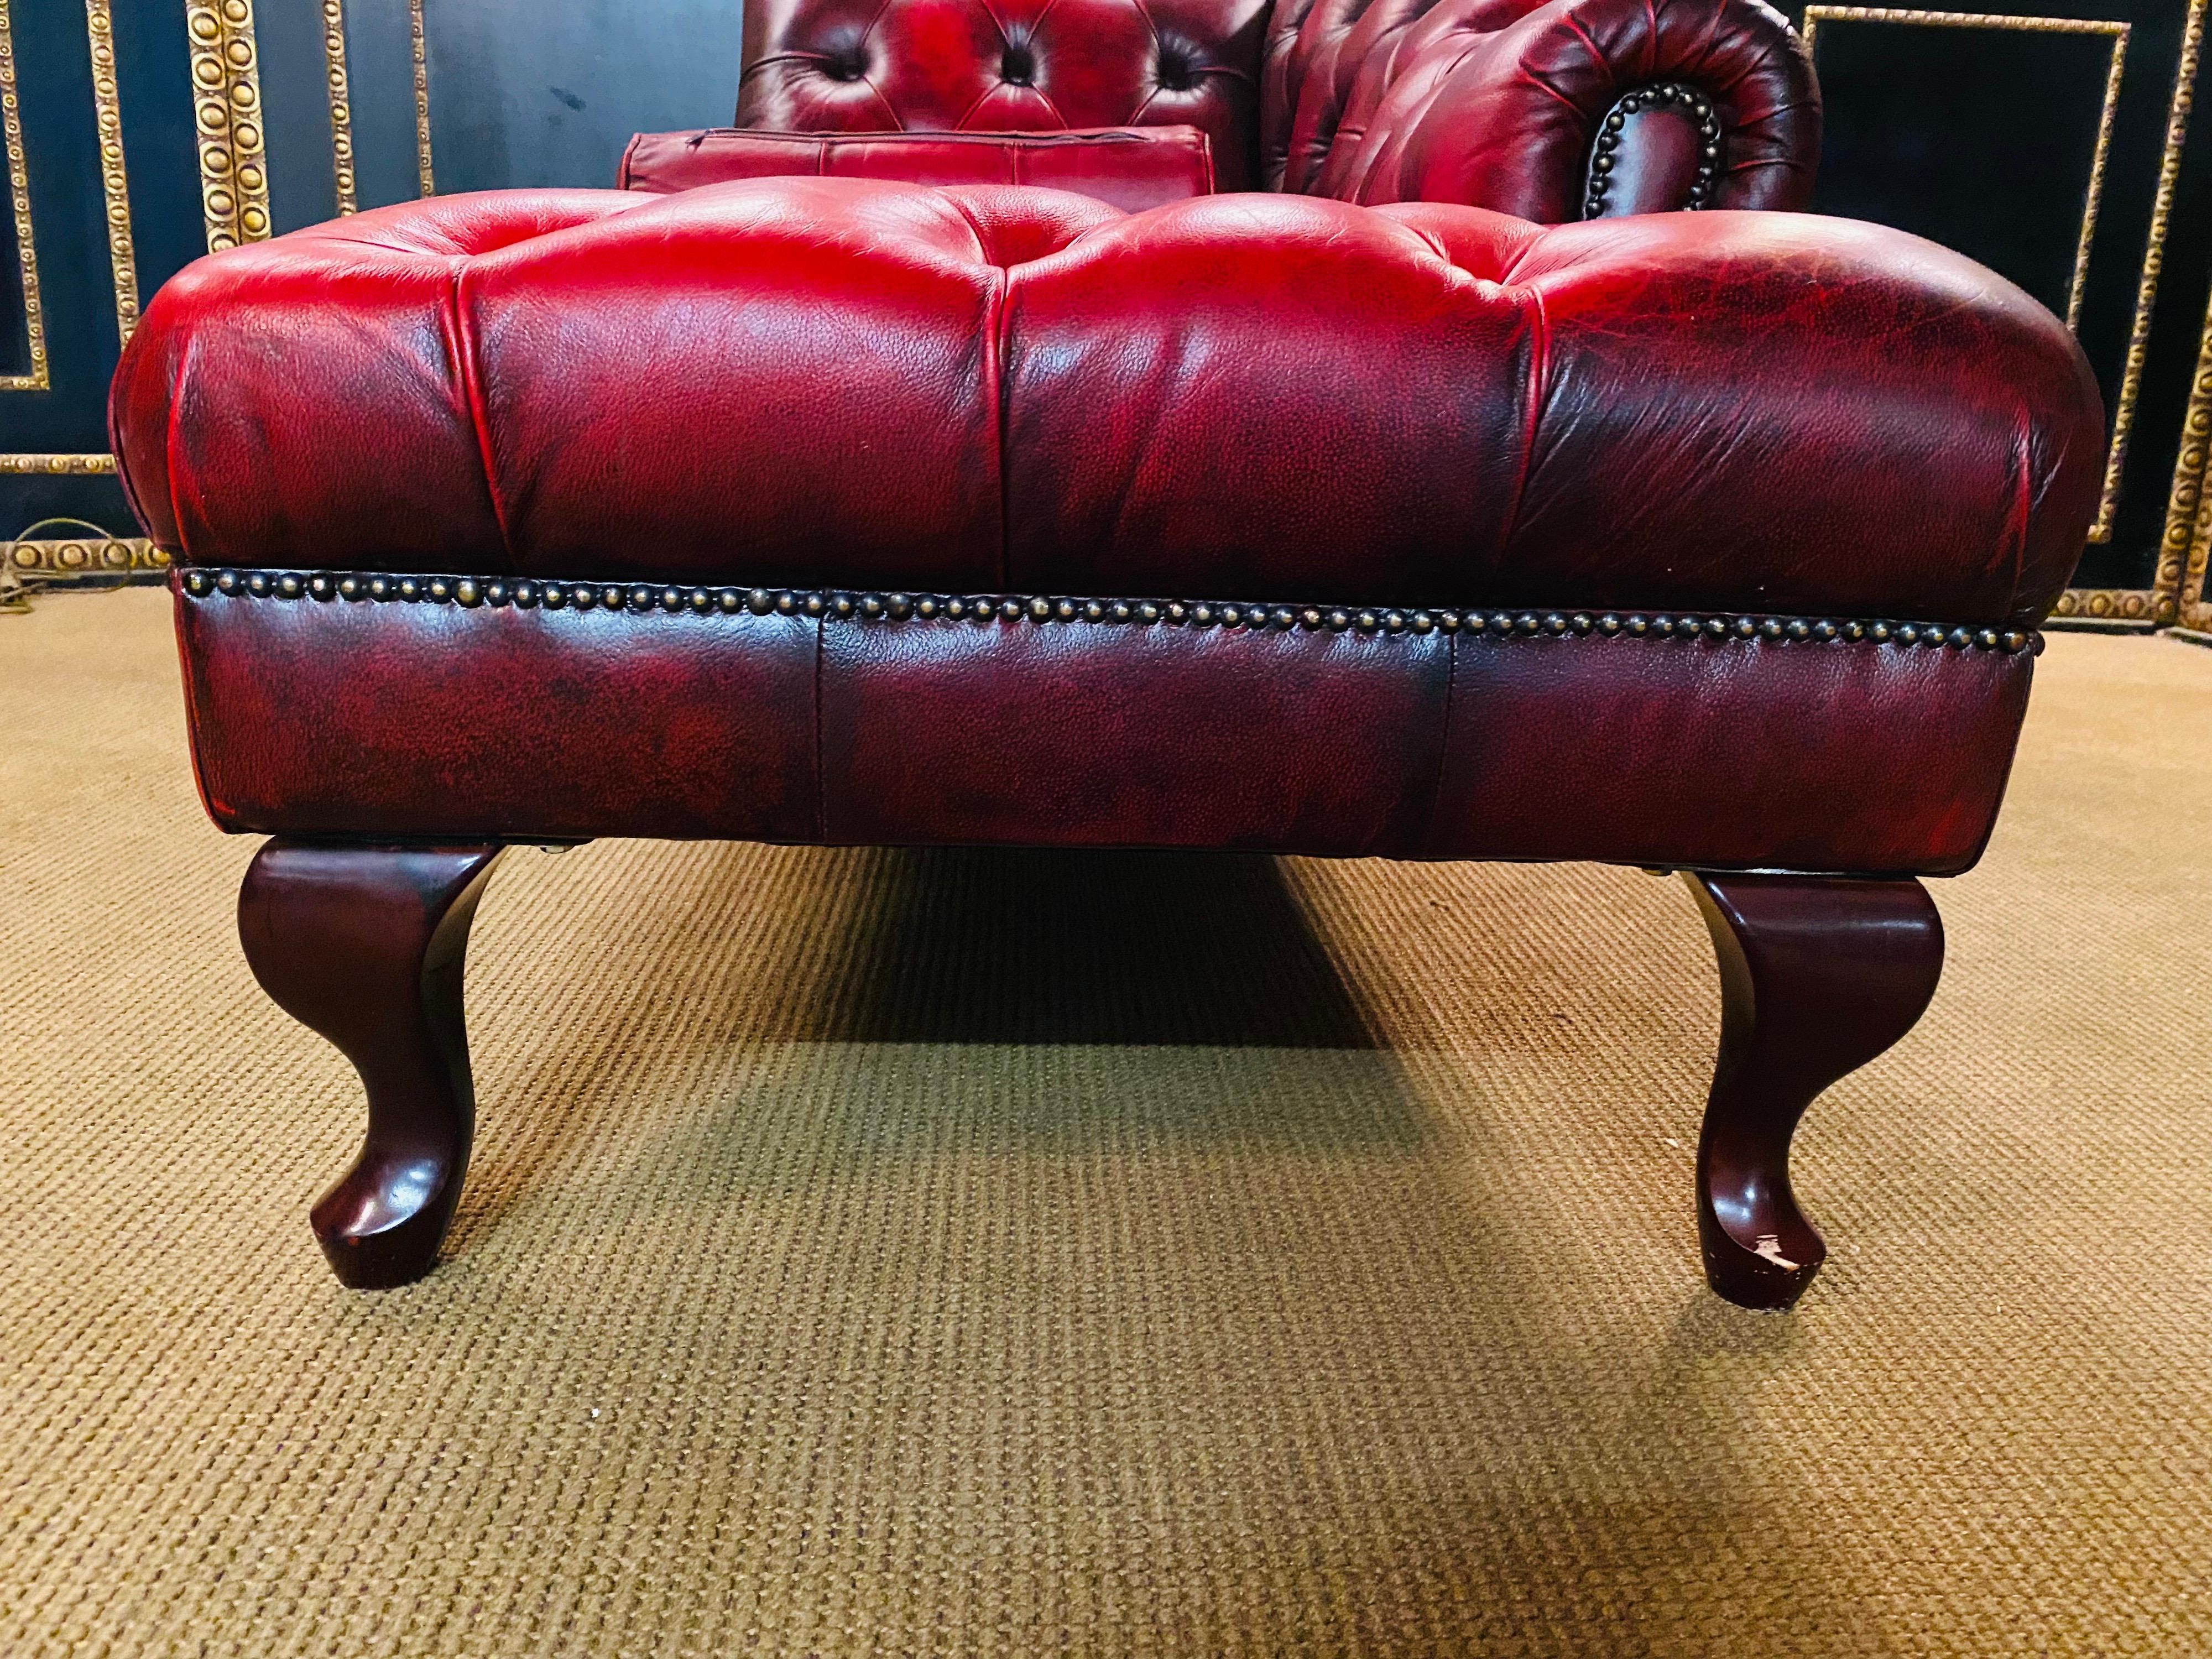 Lovely original vintage Chesterfield Red Leather Chaise Lounge Daybed Sofa For Sale 7